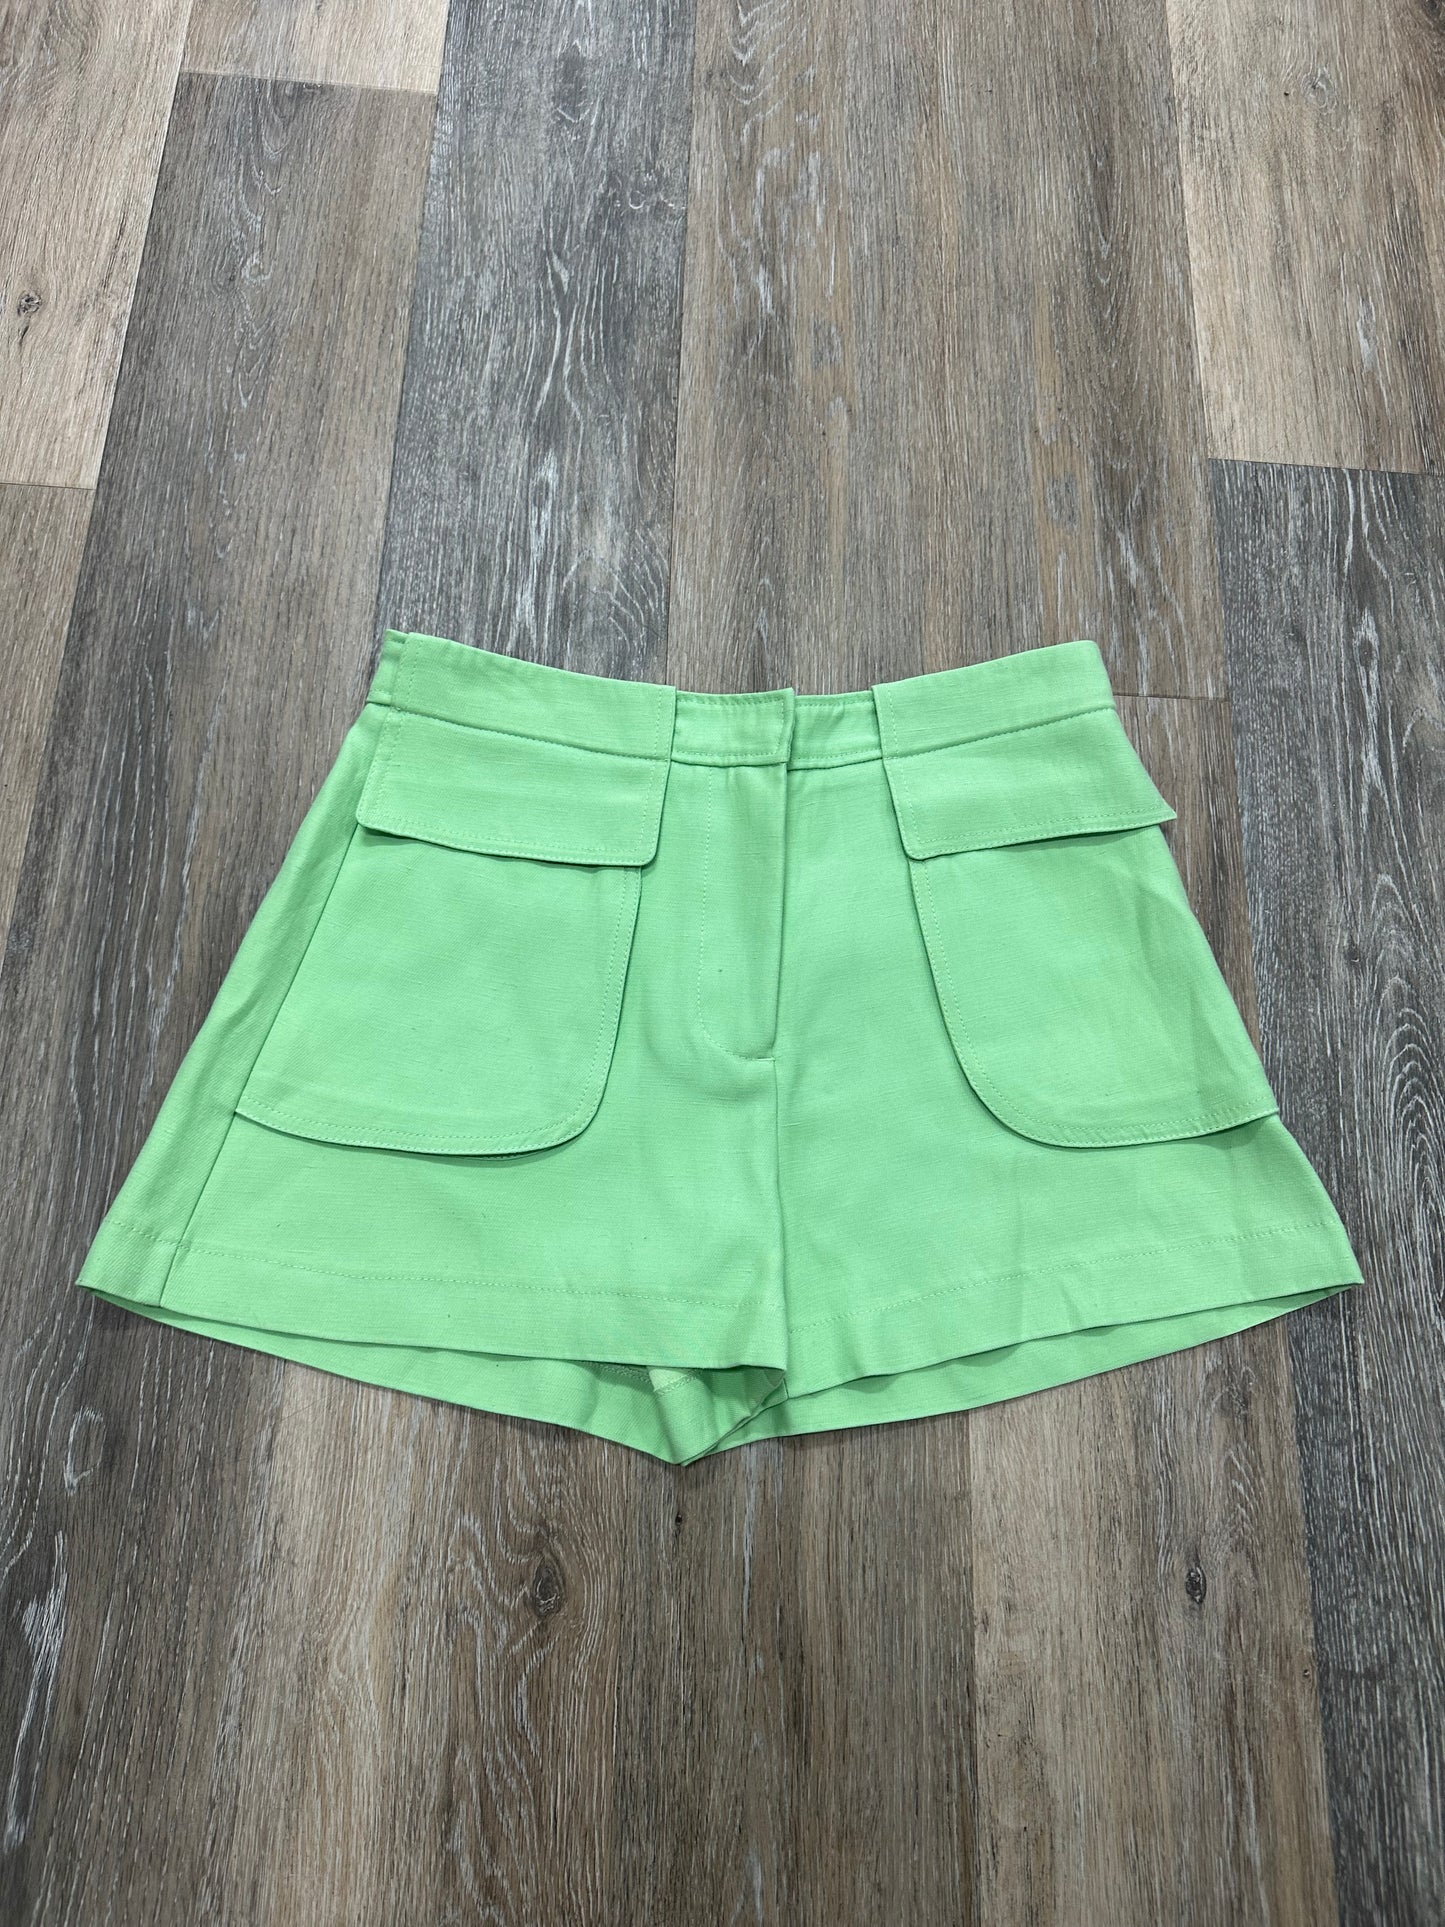 Shorts Designer By Alexis  Size: S